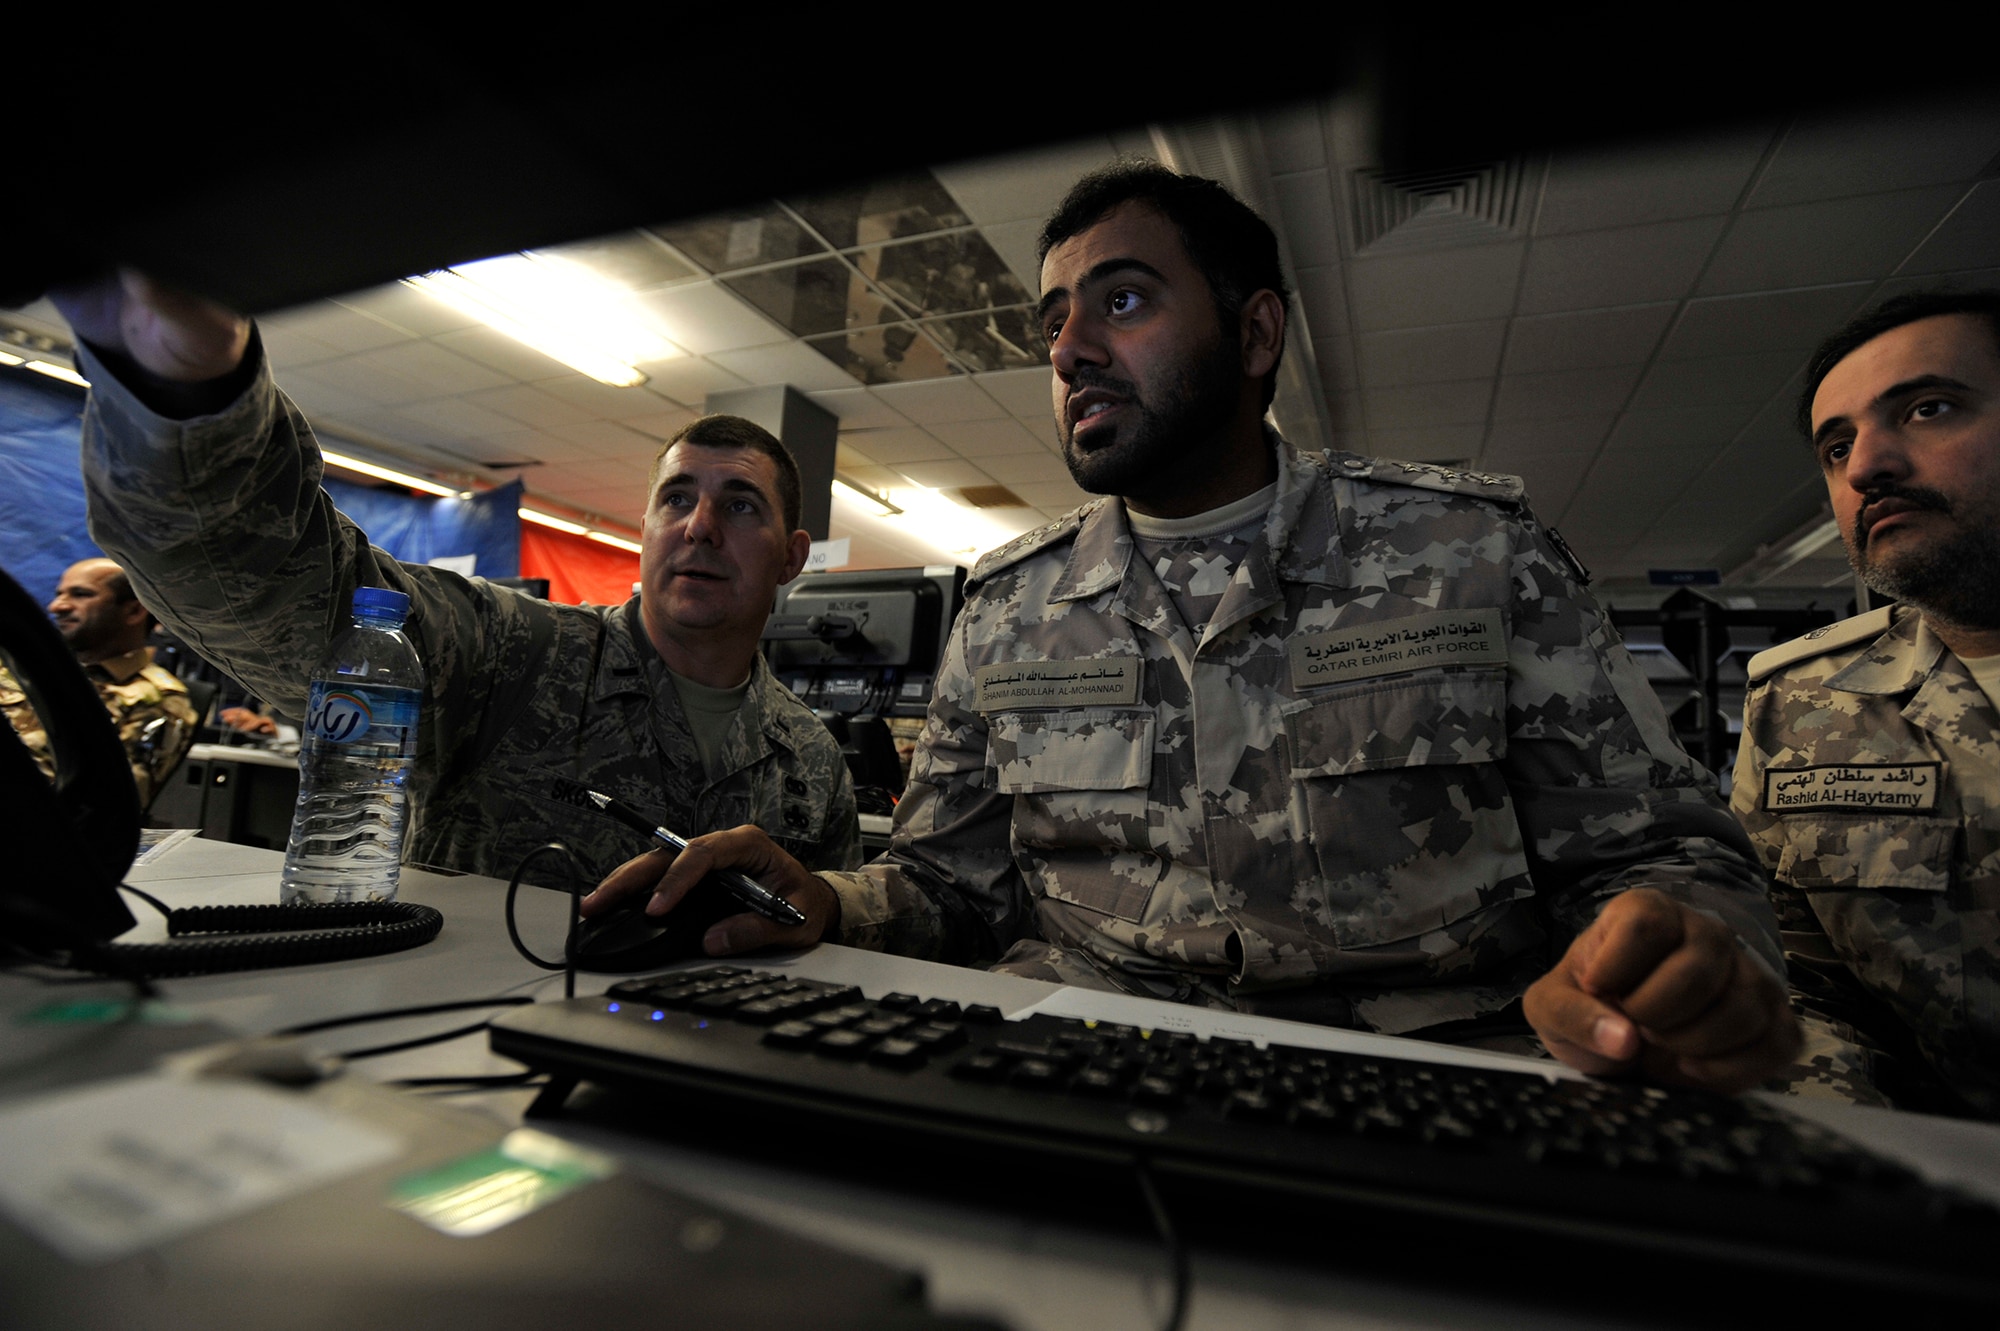 1st Lt. Joshua Skoglund, exercise coordinator, assists Qatar Emiri Air Force Capt. Ghanim Al-Mohannadi and Maj. Rashid Al-Haytamy during Arabian Gulf Shield, Feb. 3, 2016, in the Combined Air Operations Center, Al Udeid Air Base, Qatar. Arabian Gulf Shield is the culminating exercise for the Gulf Cooperation Council (GCC) Liaison Officer (LNO) Program. The exercise is designed to exercise GCC LNO procedures and connectivity to host nation Air Operations Centers which improves US-GCC interoperability. (U.S. Air Force photo by Master Sgt. Joshua Strang)